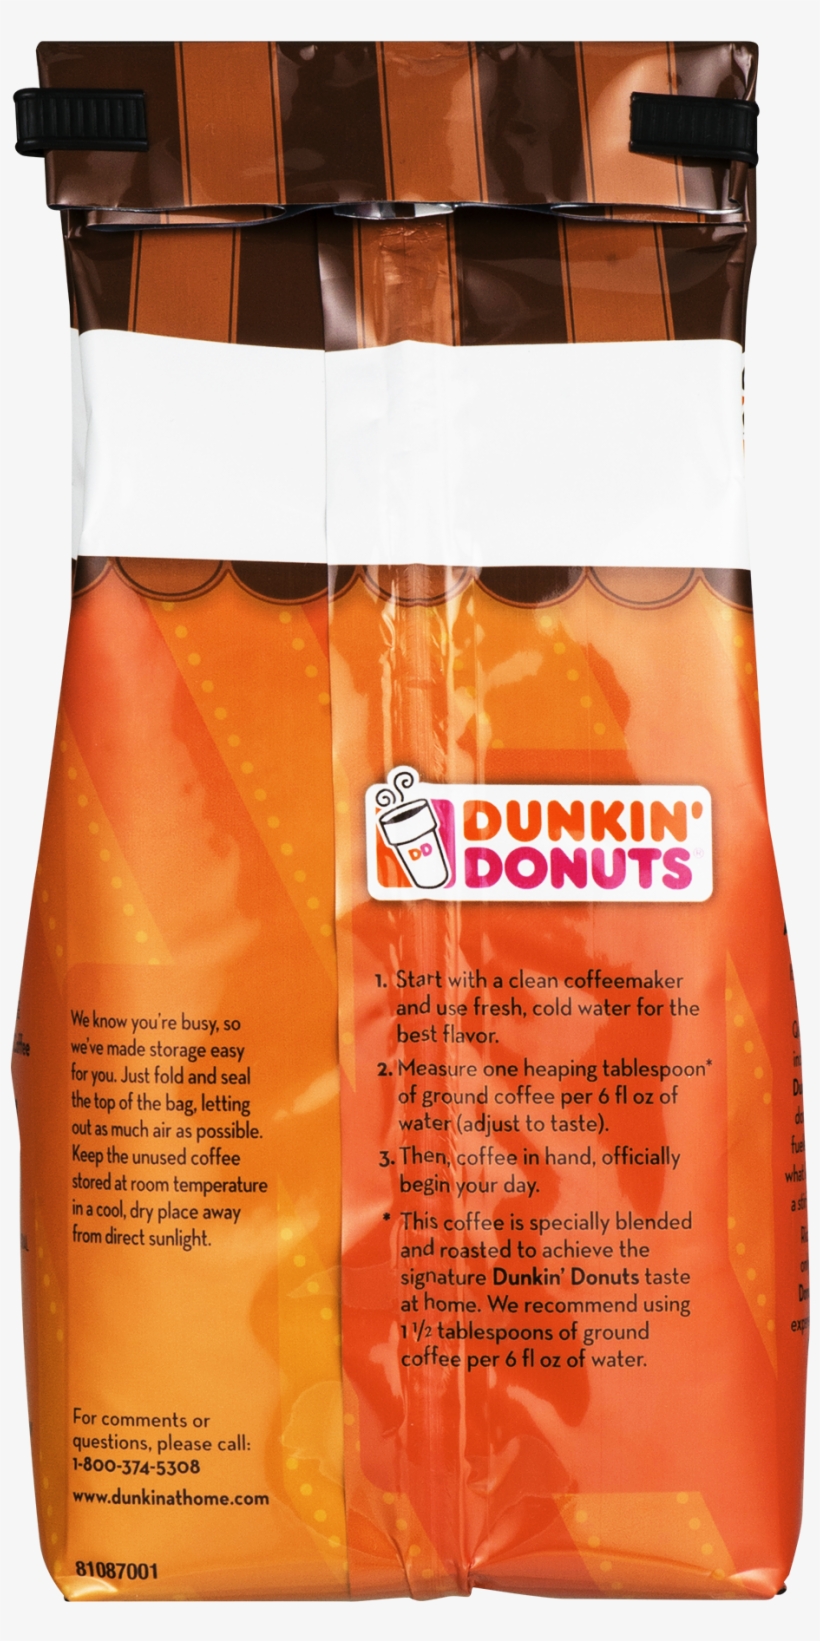 Dunkin' Donuts Cinnamon Coffee Roll Artificially Flavored - Dunkin Donuts, transparent png #9033840